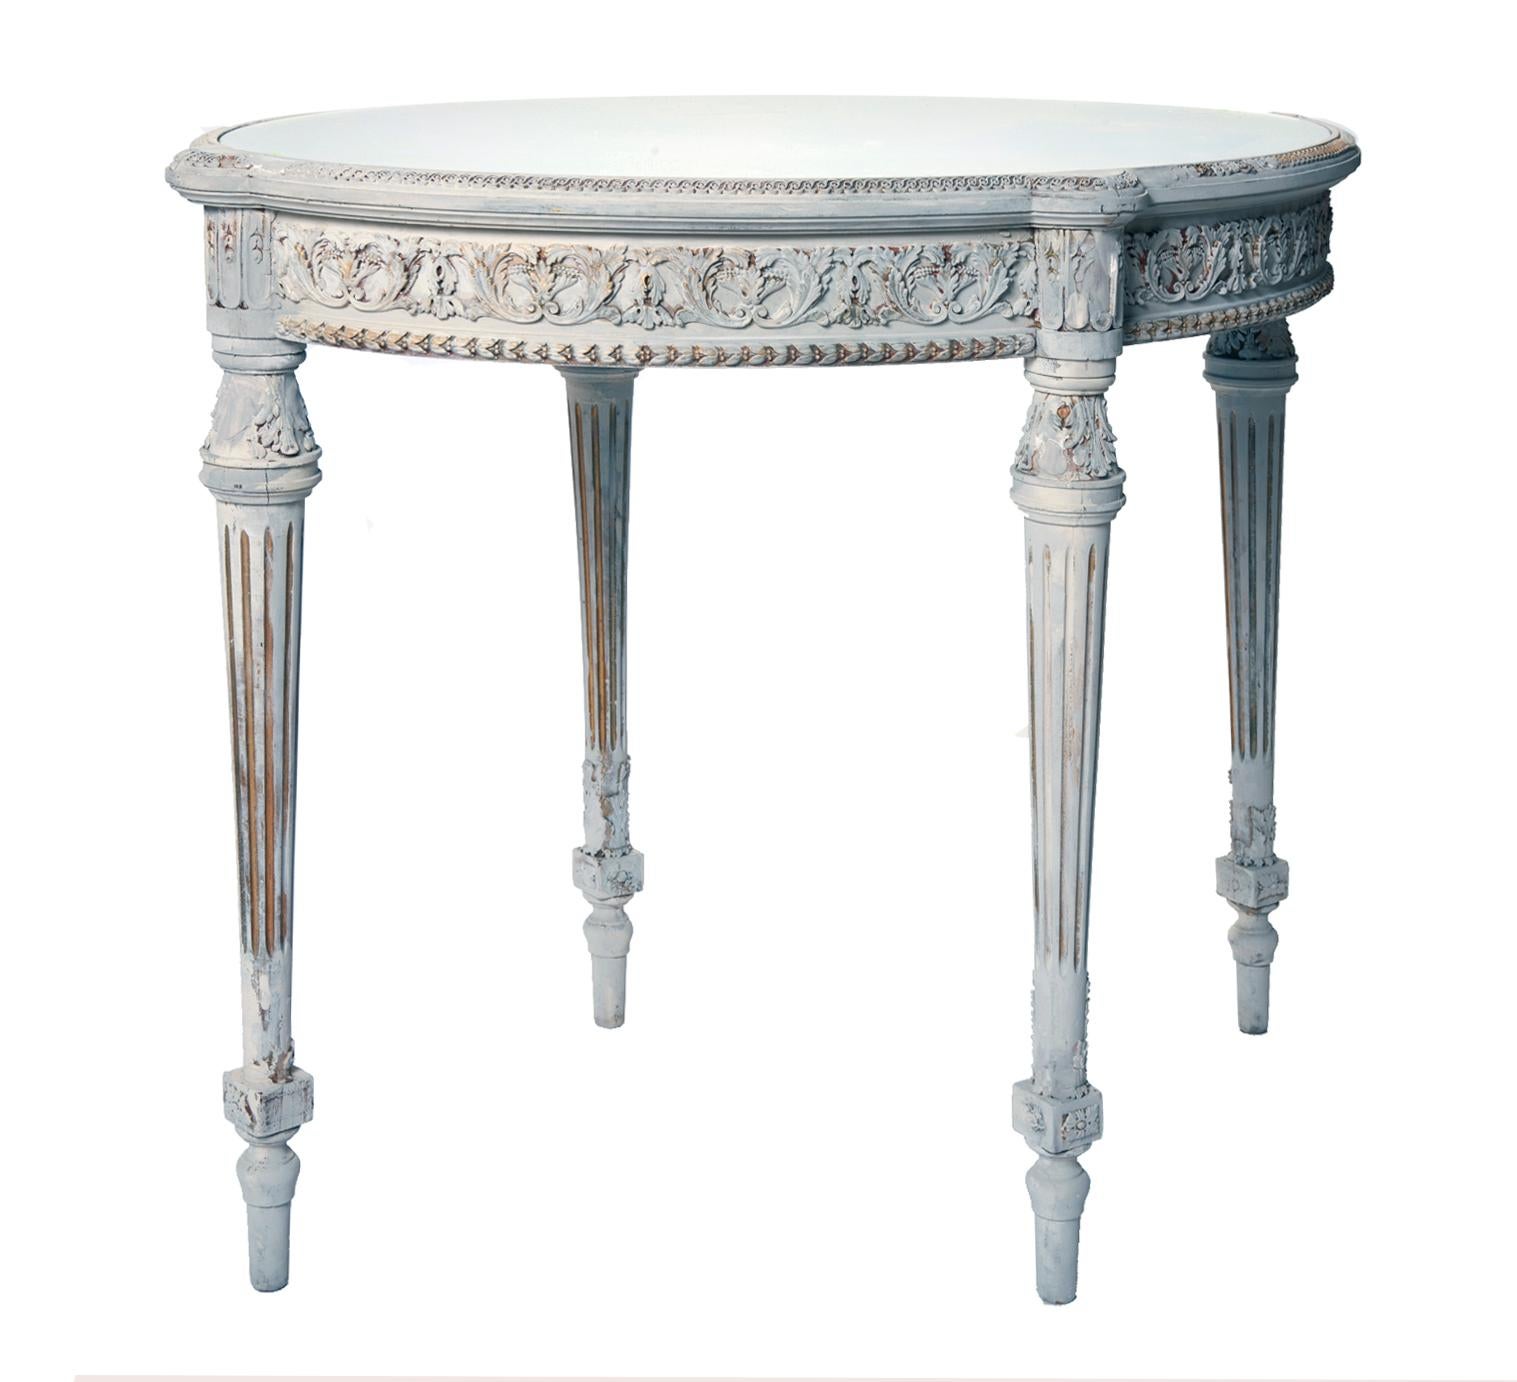 French? center table, originally with a dark marble top has been updated with a mirrored glass top which sits inside the rim. The top rim has a petite scroll pattern.
The apron with its classical pattern in gesso accented with gilding wax. 
The